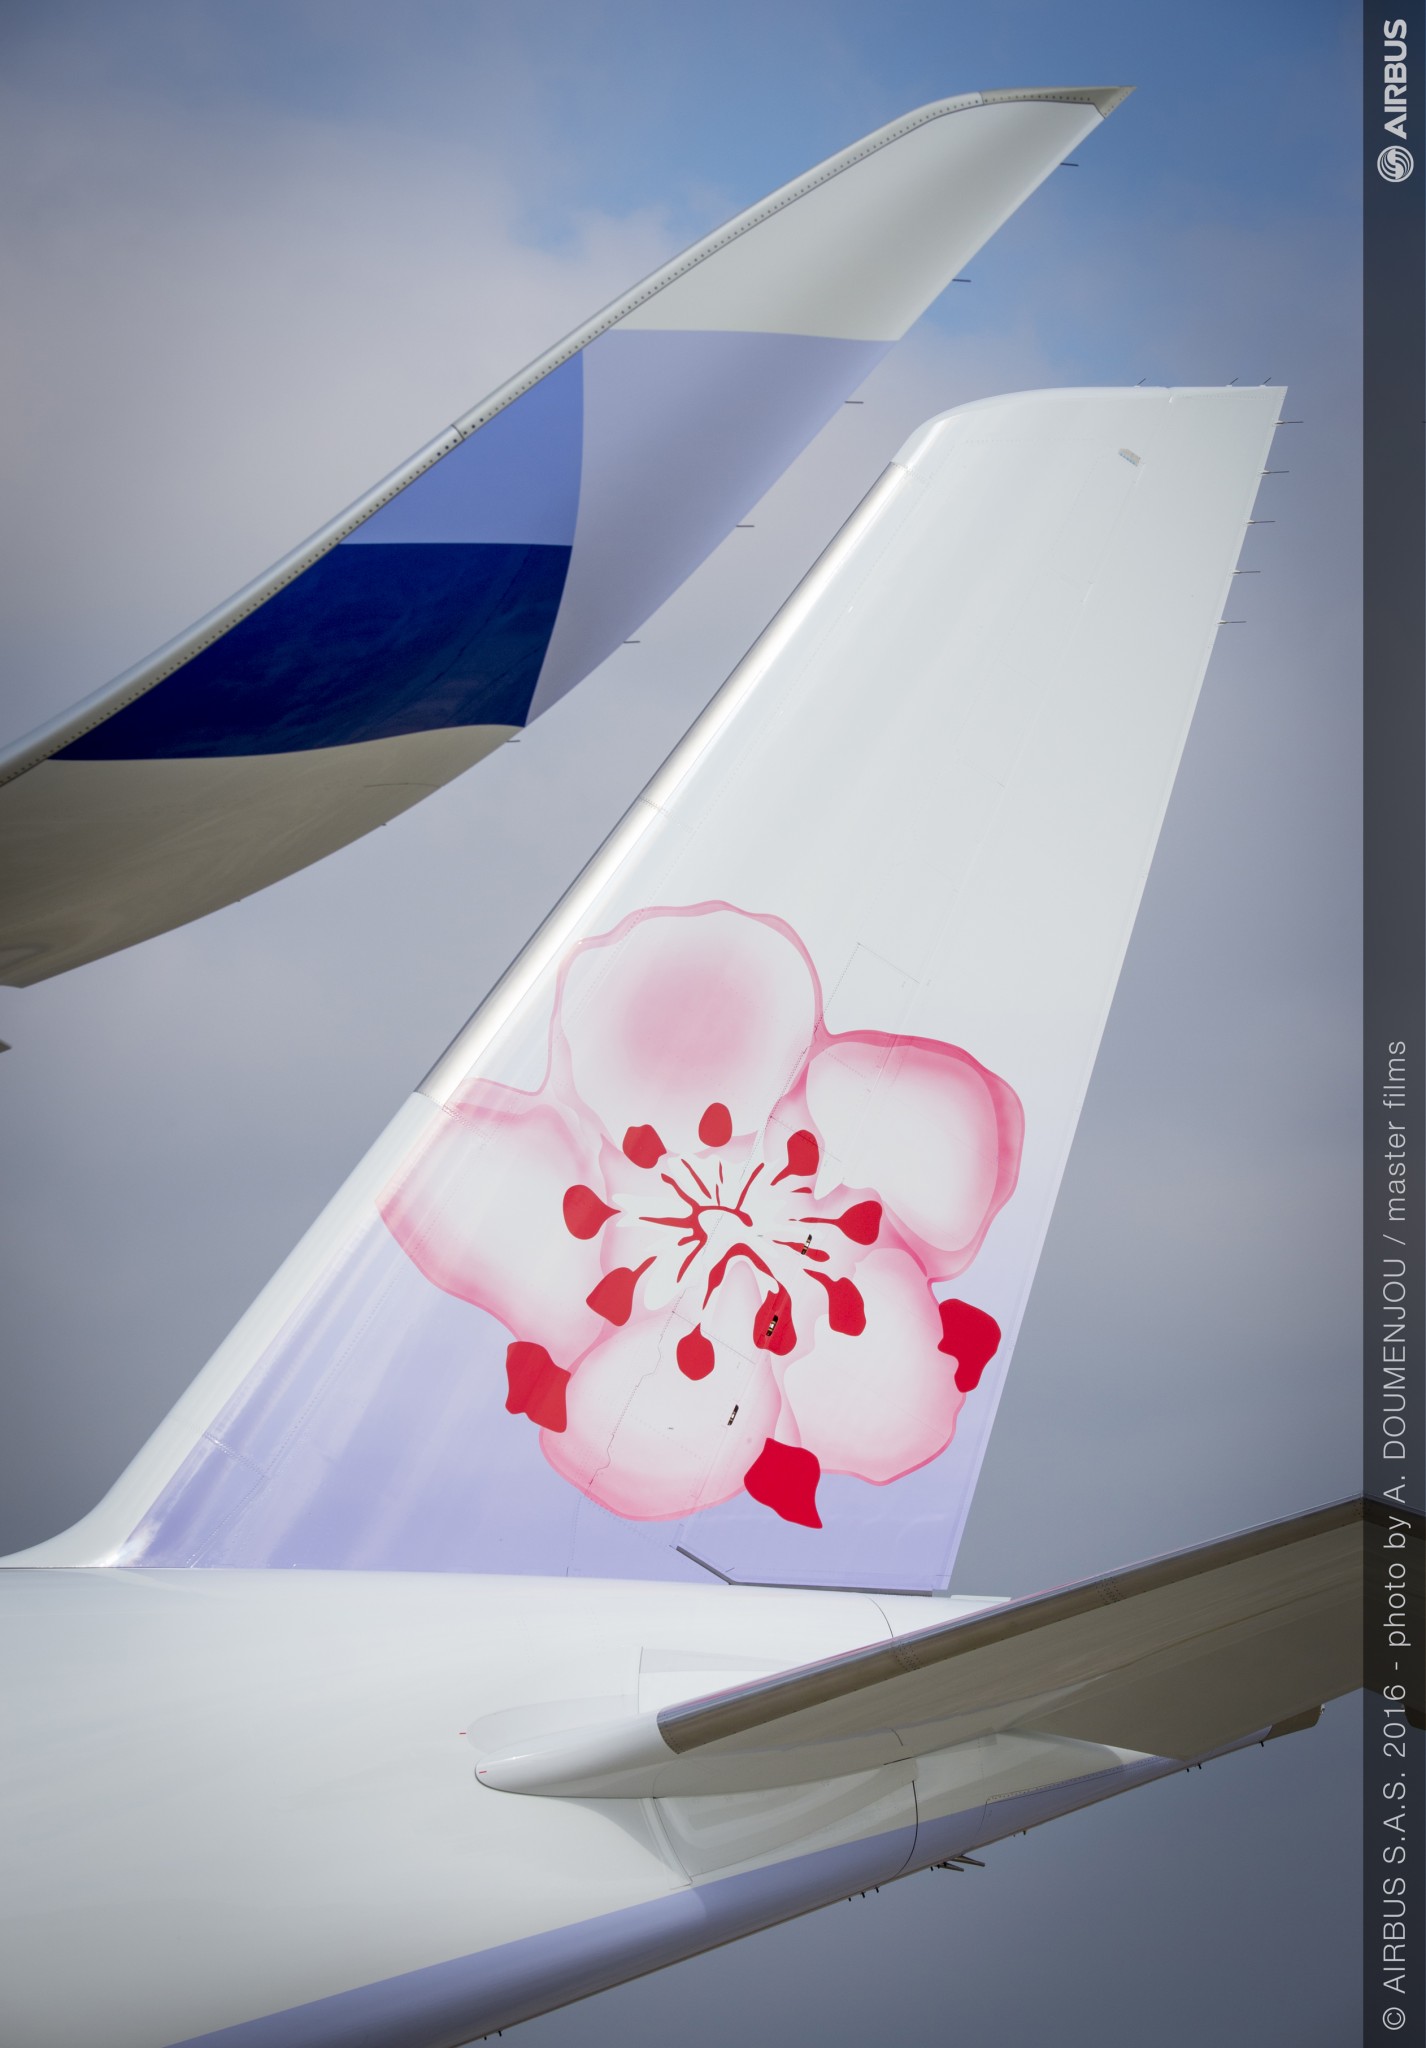 China Airlines becomes new operator of the A350 XWB